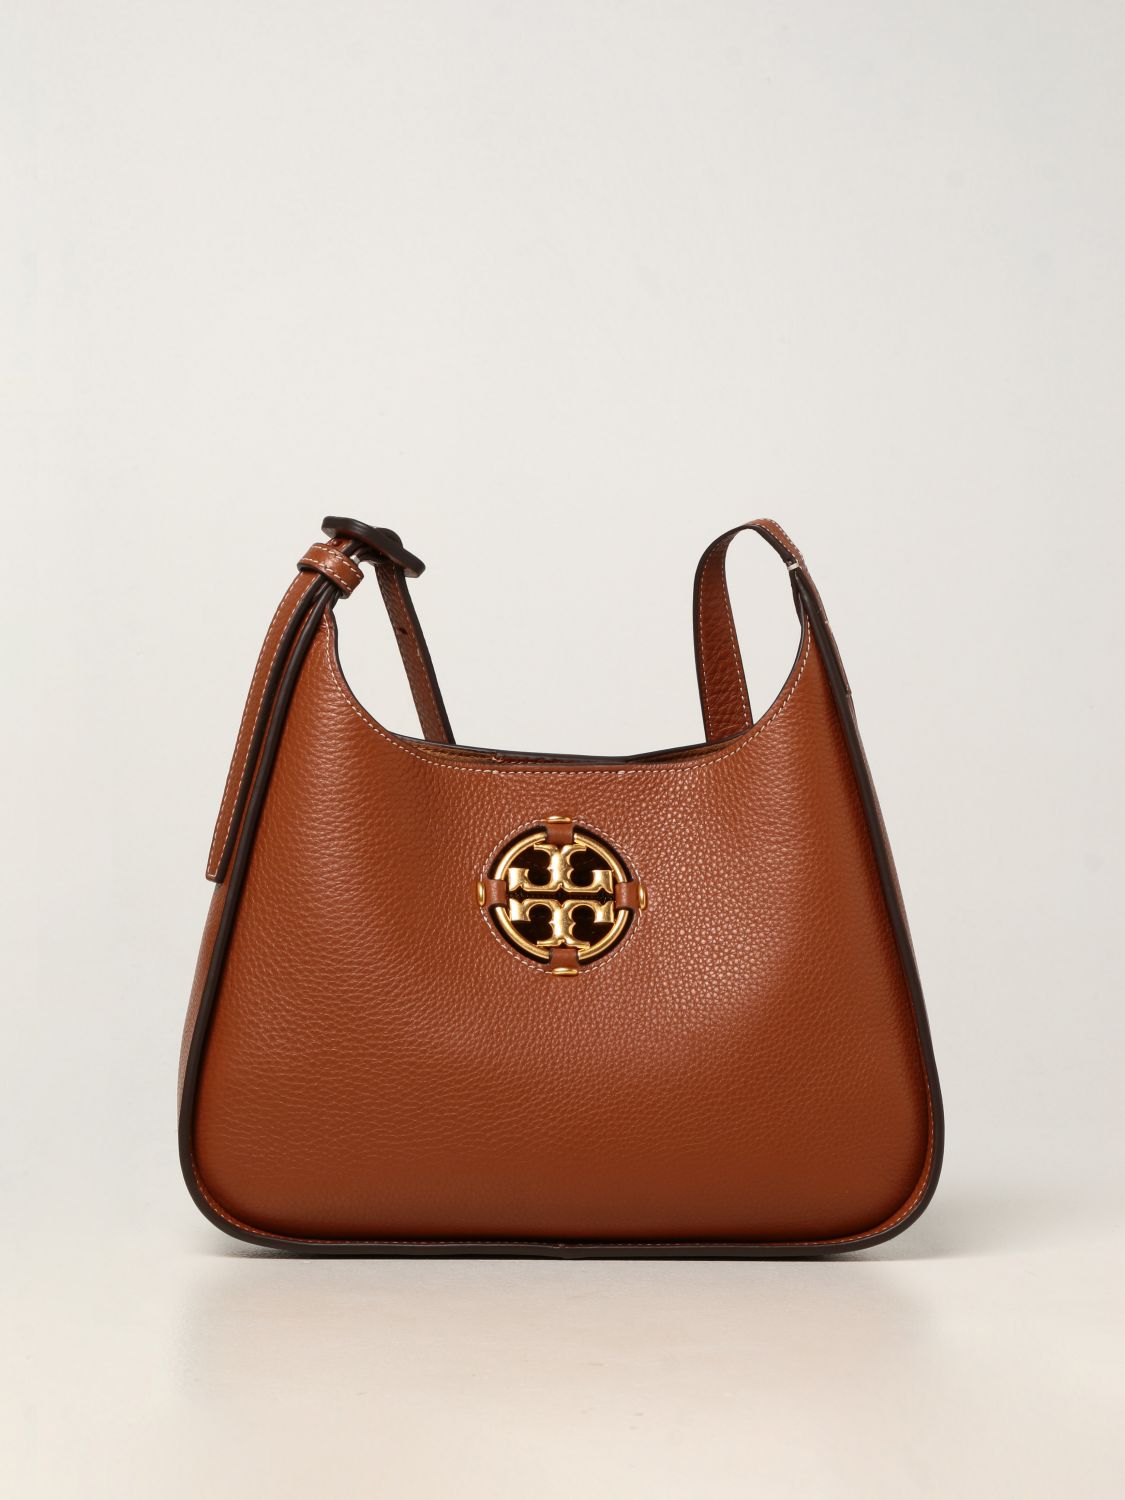 TORY BURCH: Miller bag in grained leather with emblem - Brown | Tory Burch  crossbody bags 82982 online on 